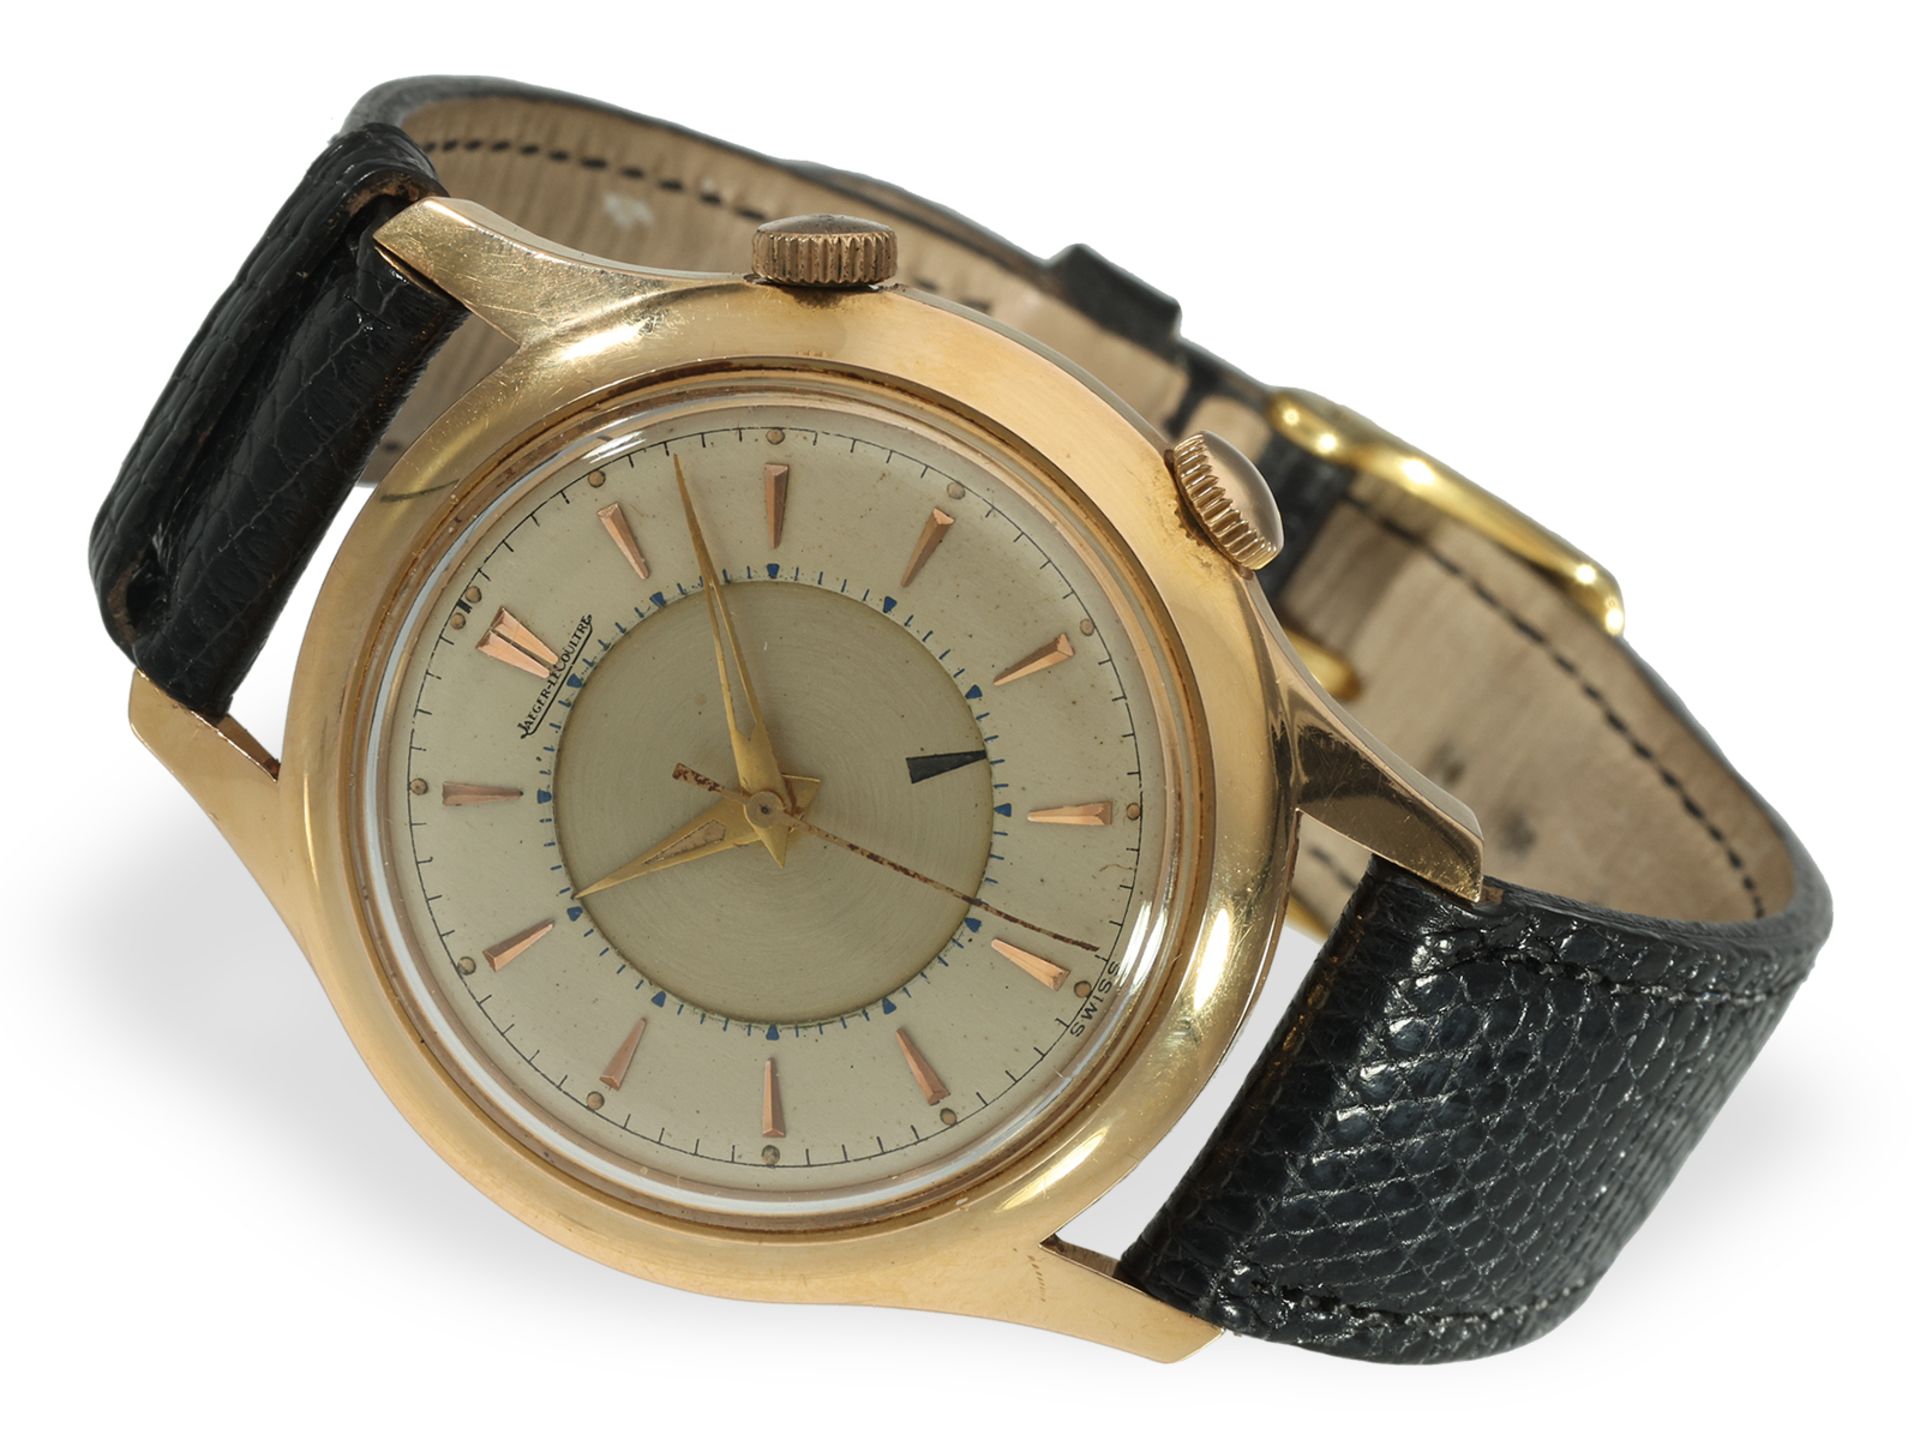 Wristwatch: Jaeger Le Coultre Memovox Ref. E852 "Pink-Gold", full set from 1961 - Image 2 of 7